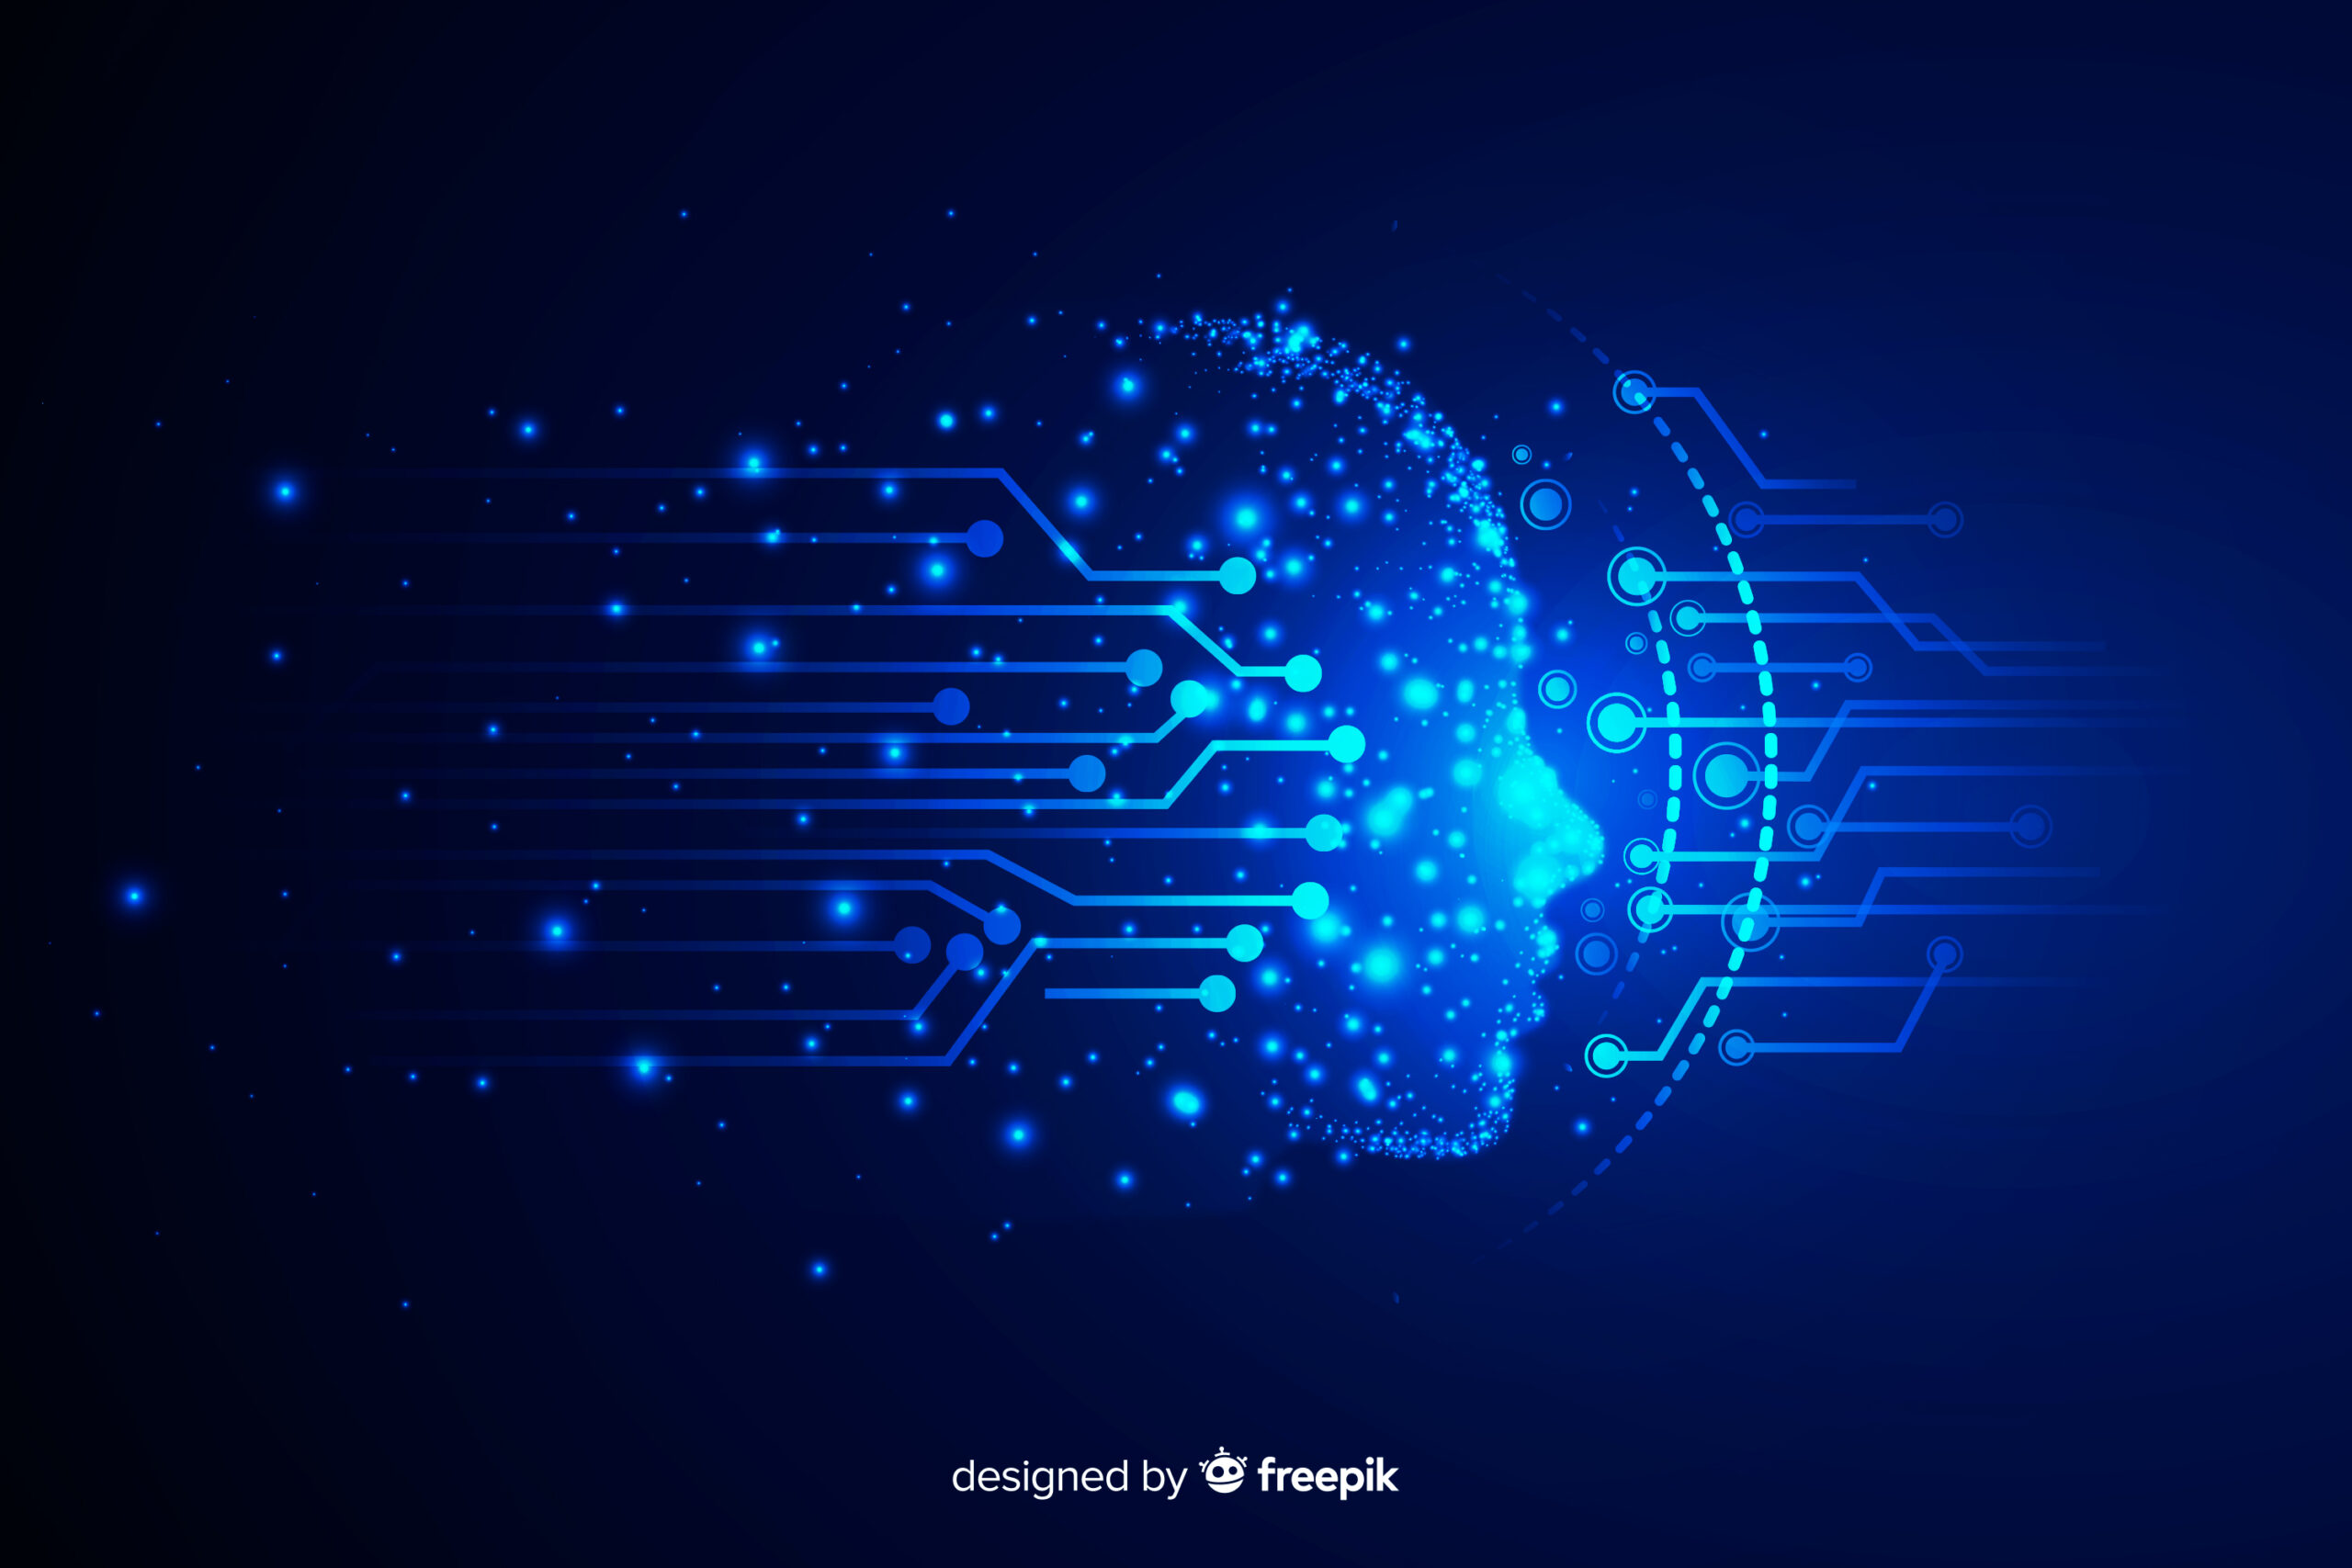 The Nasscom-BCG report forecasts India’s AI industry to reach a valuation of $17 billion by 2027